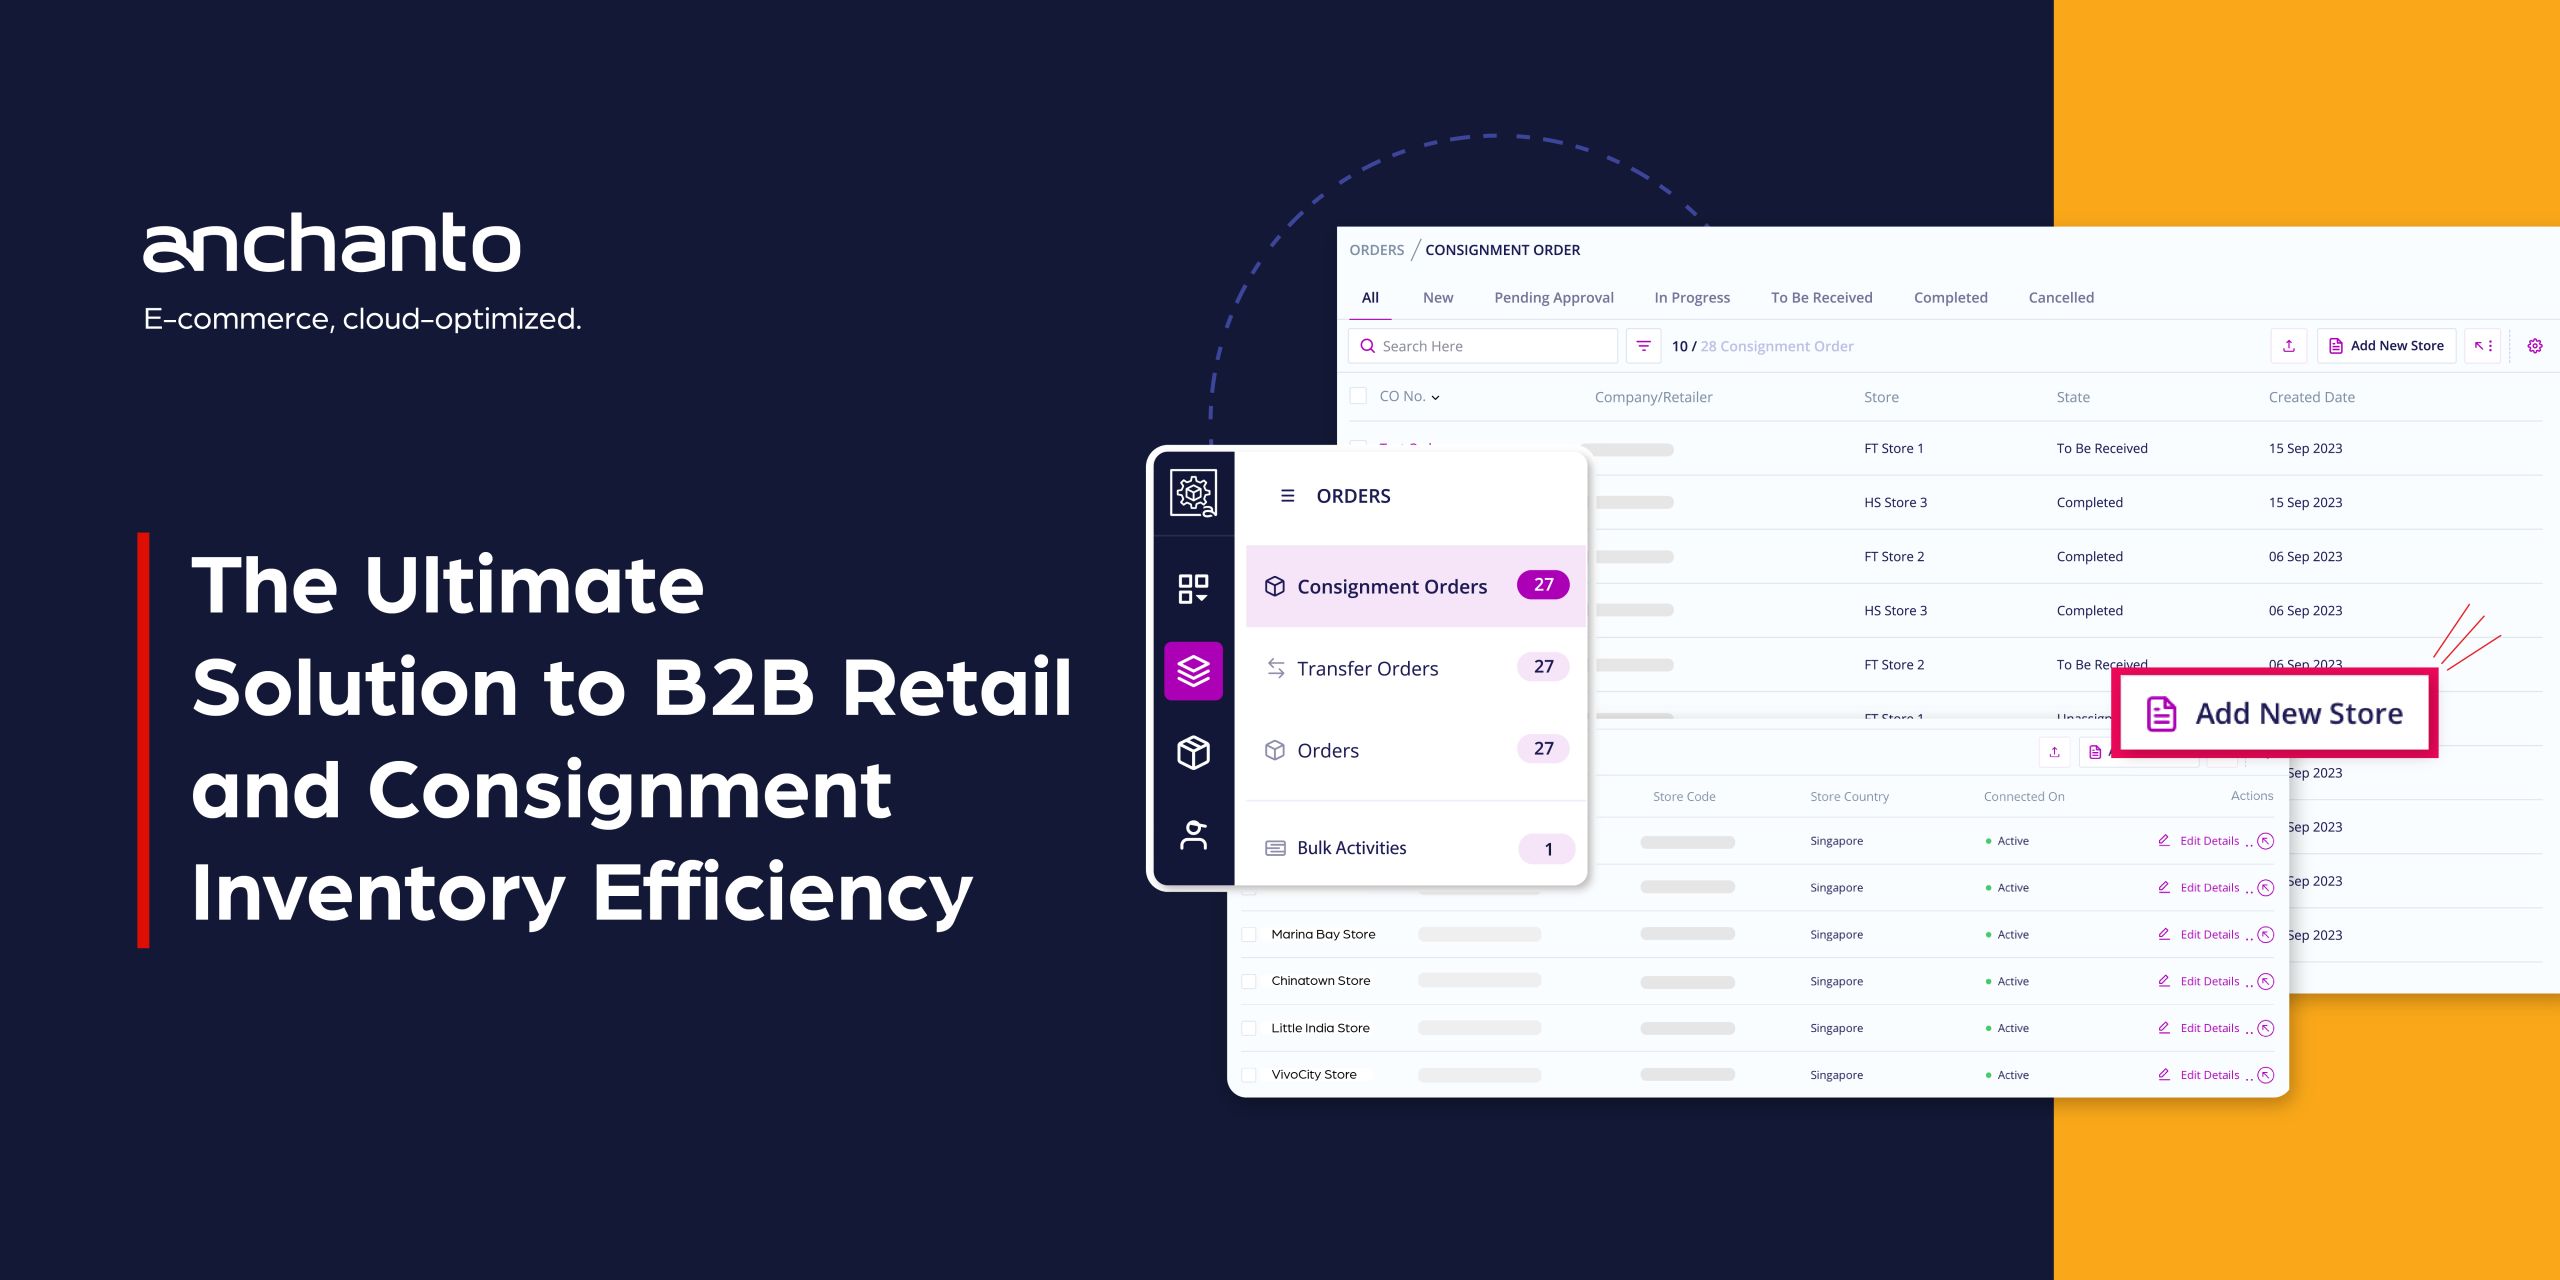 The Ultimate Solution to B2B Retail and Consignment Inventory Management